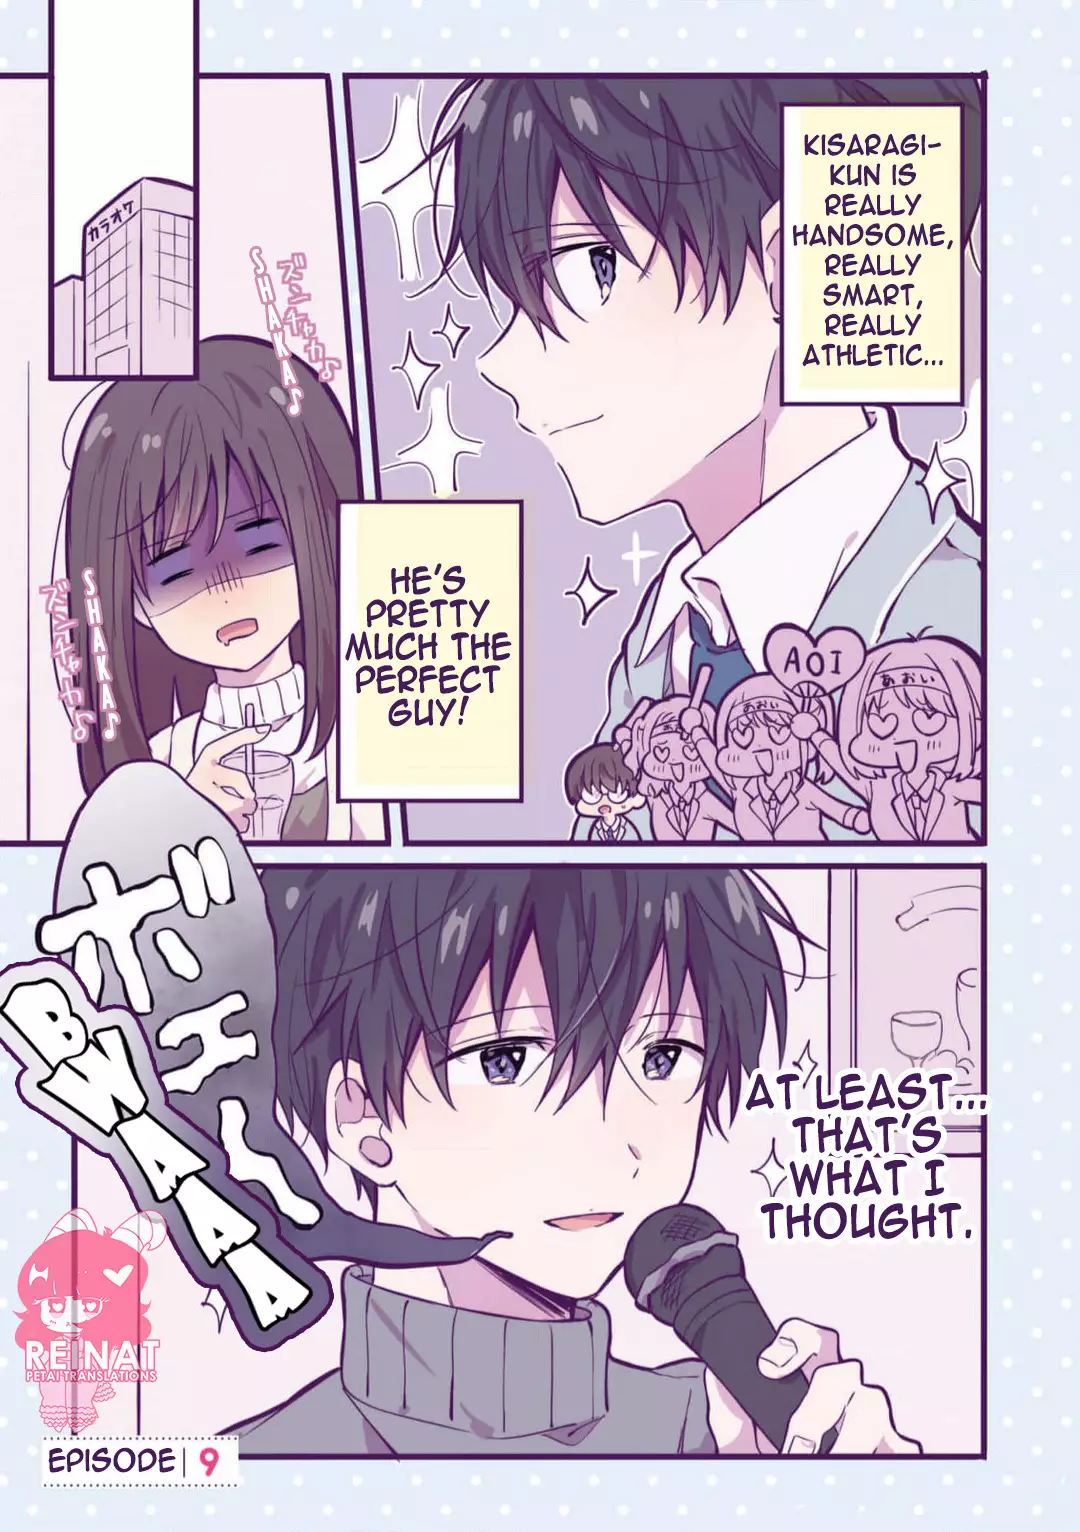 A First-Year High School Boy Whose Hobby Is Cross-Dressing - 9 page 1-8e9d81b5